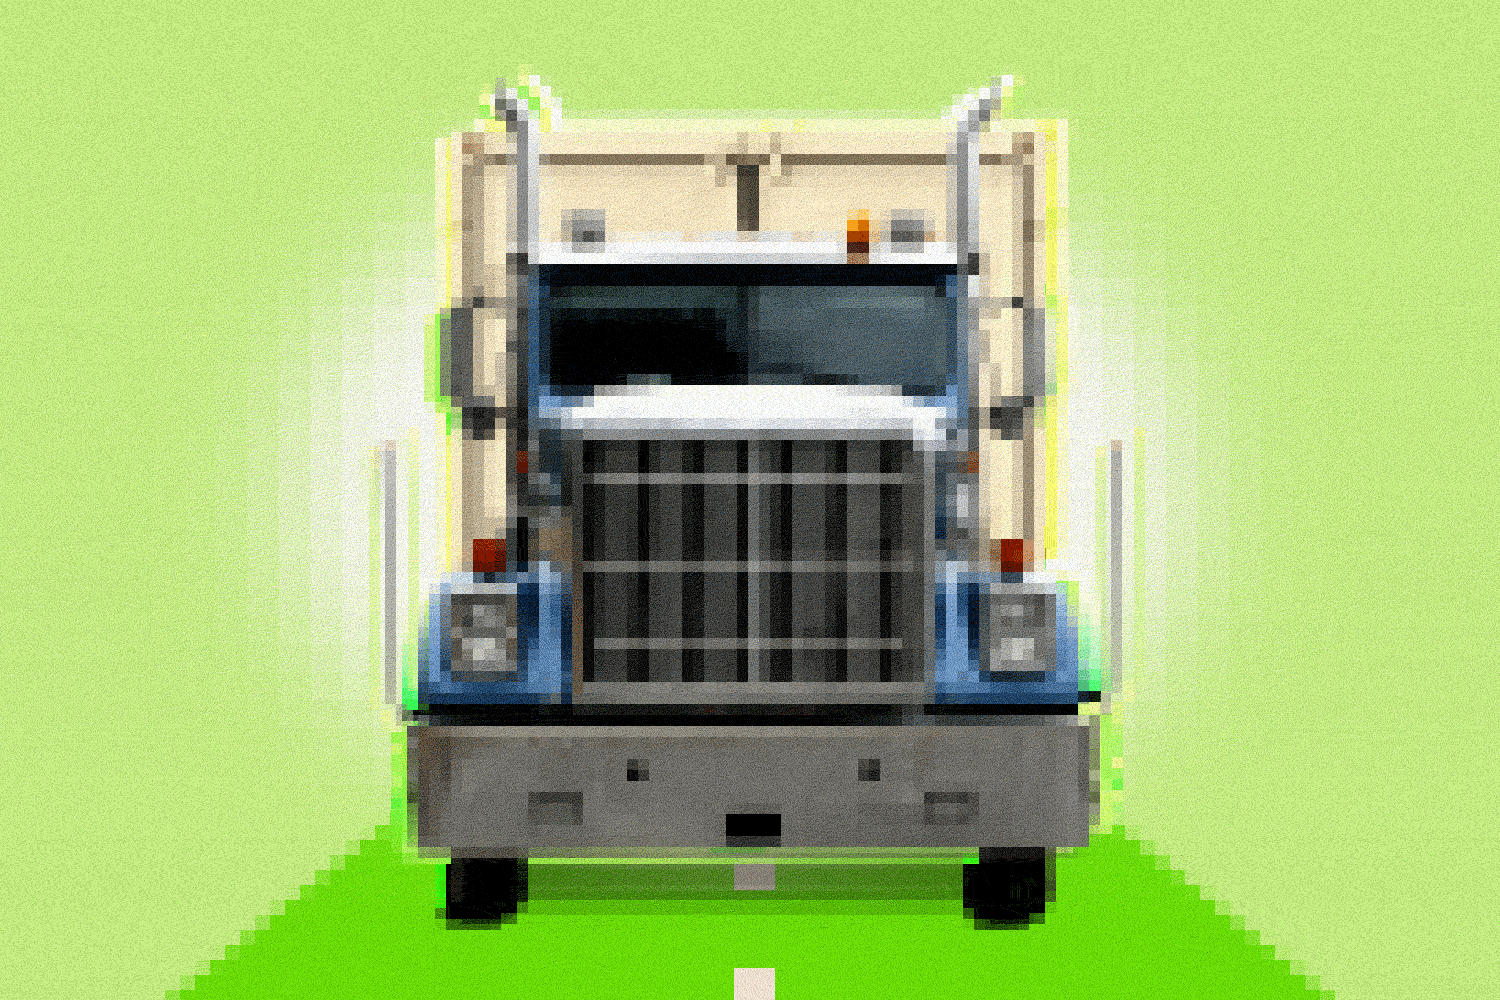 Pixelated truck going down the highway.